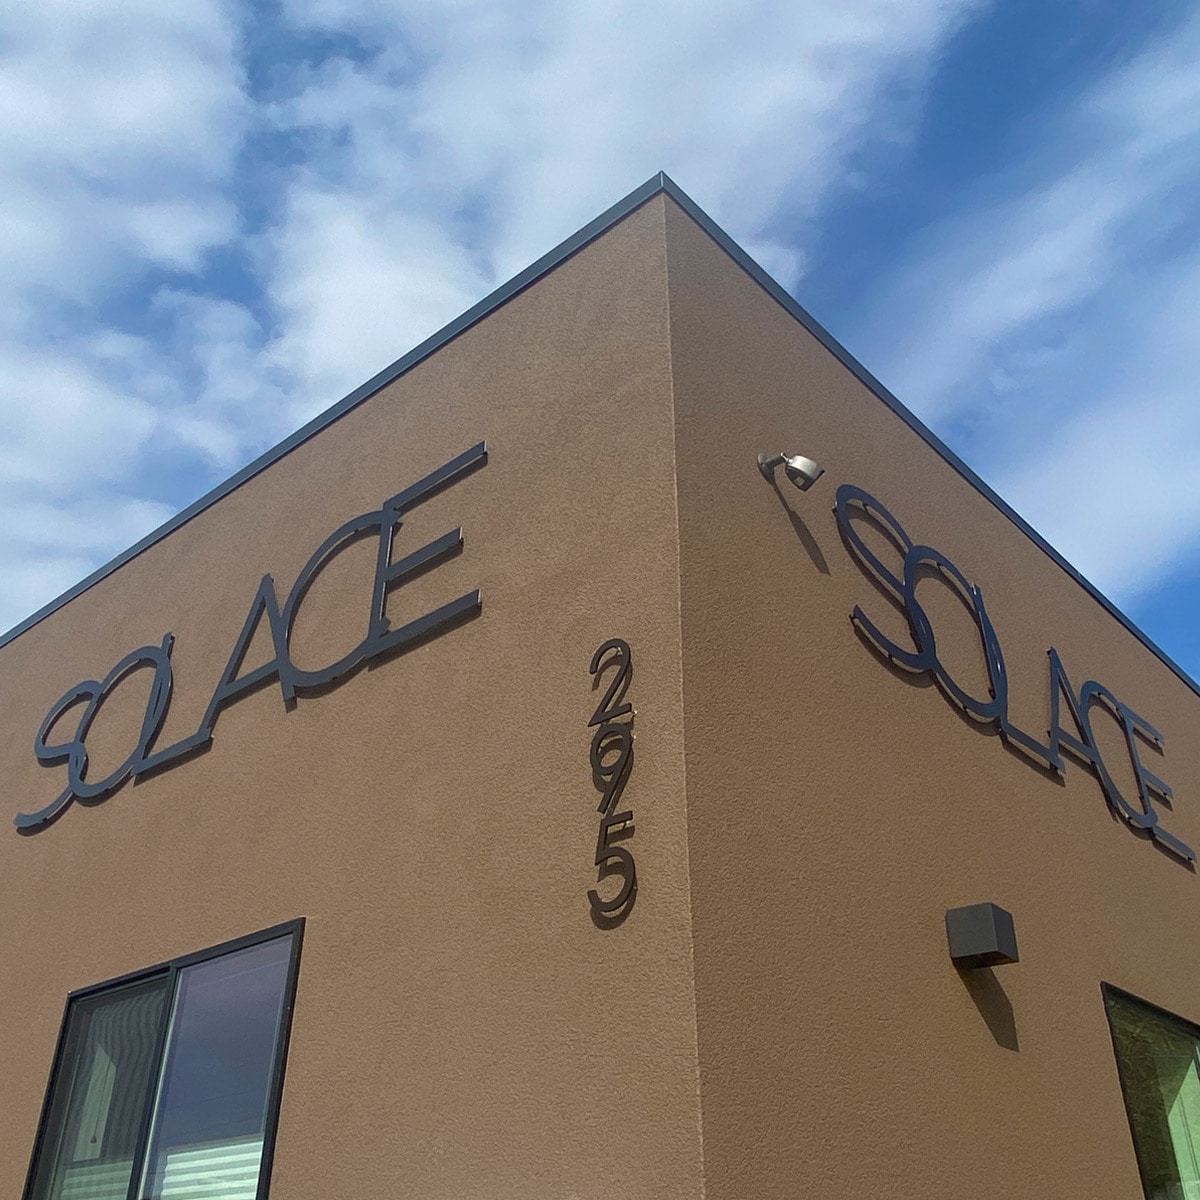 Solace building logos plasma cut out of 12g steel and powder coated matte black.